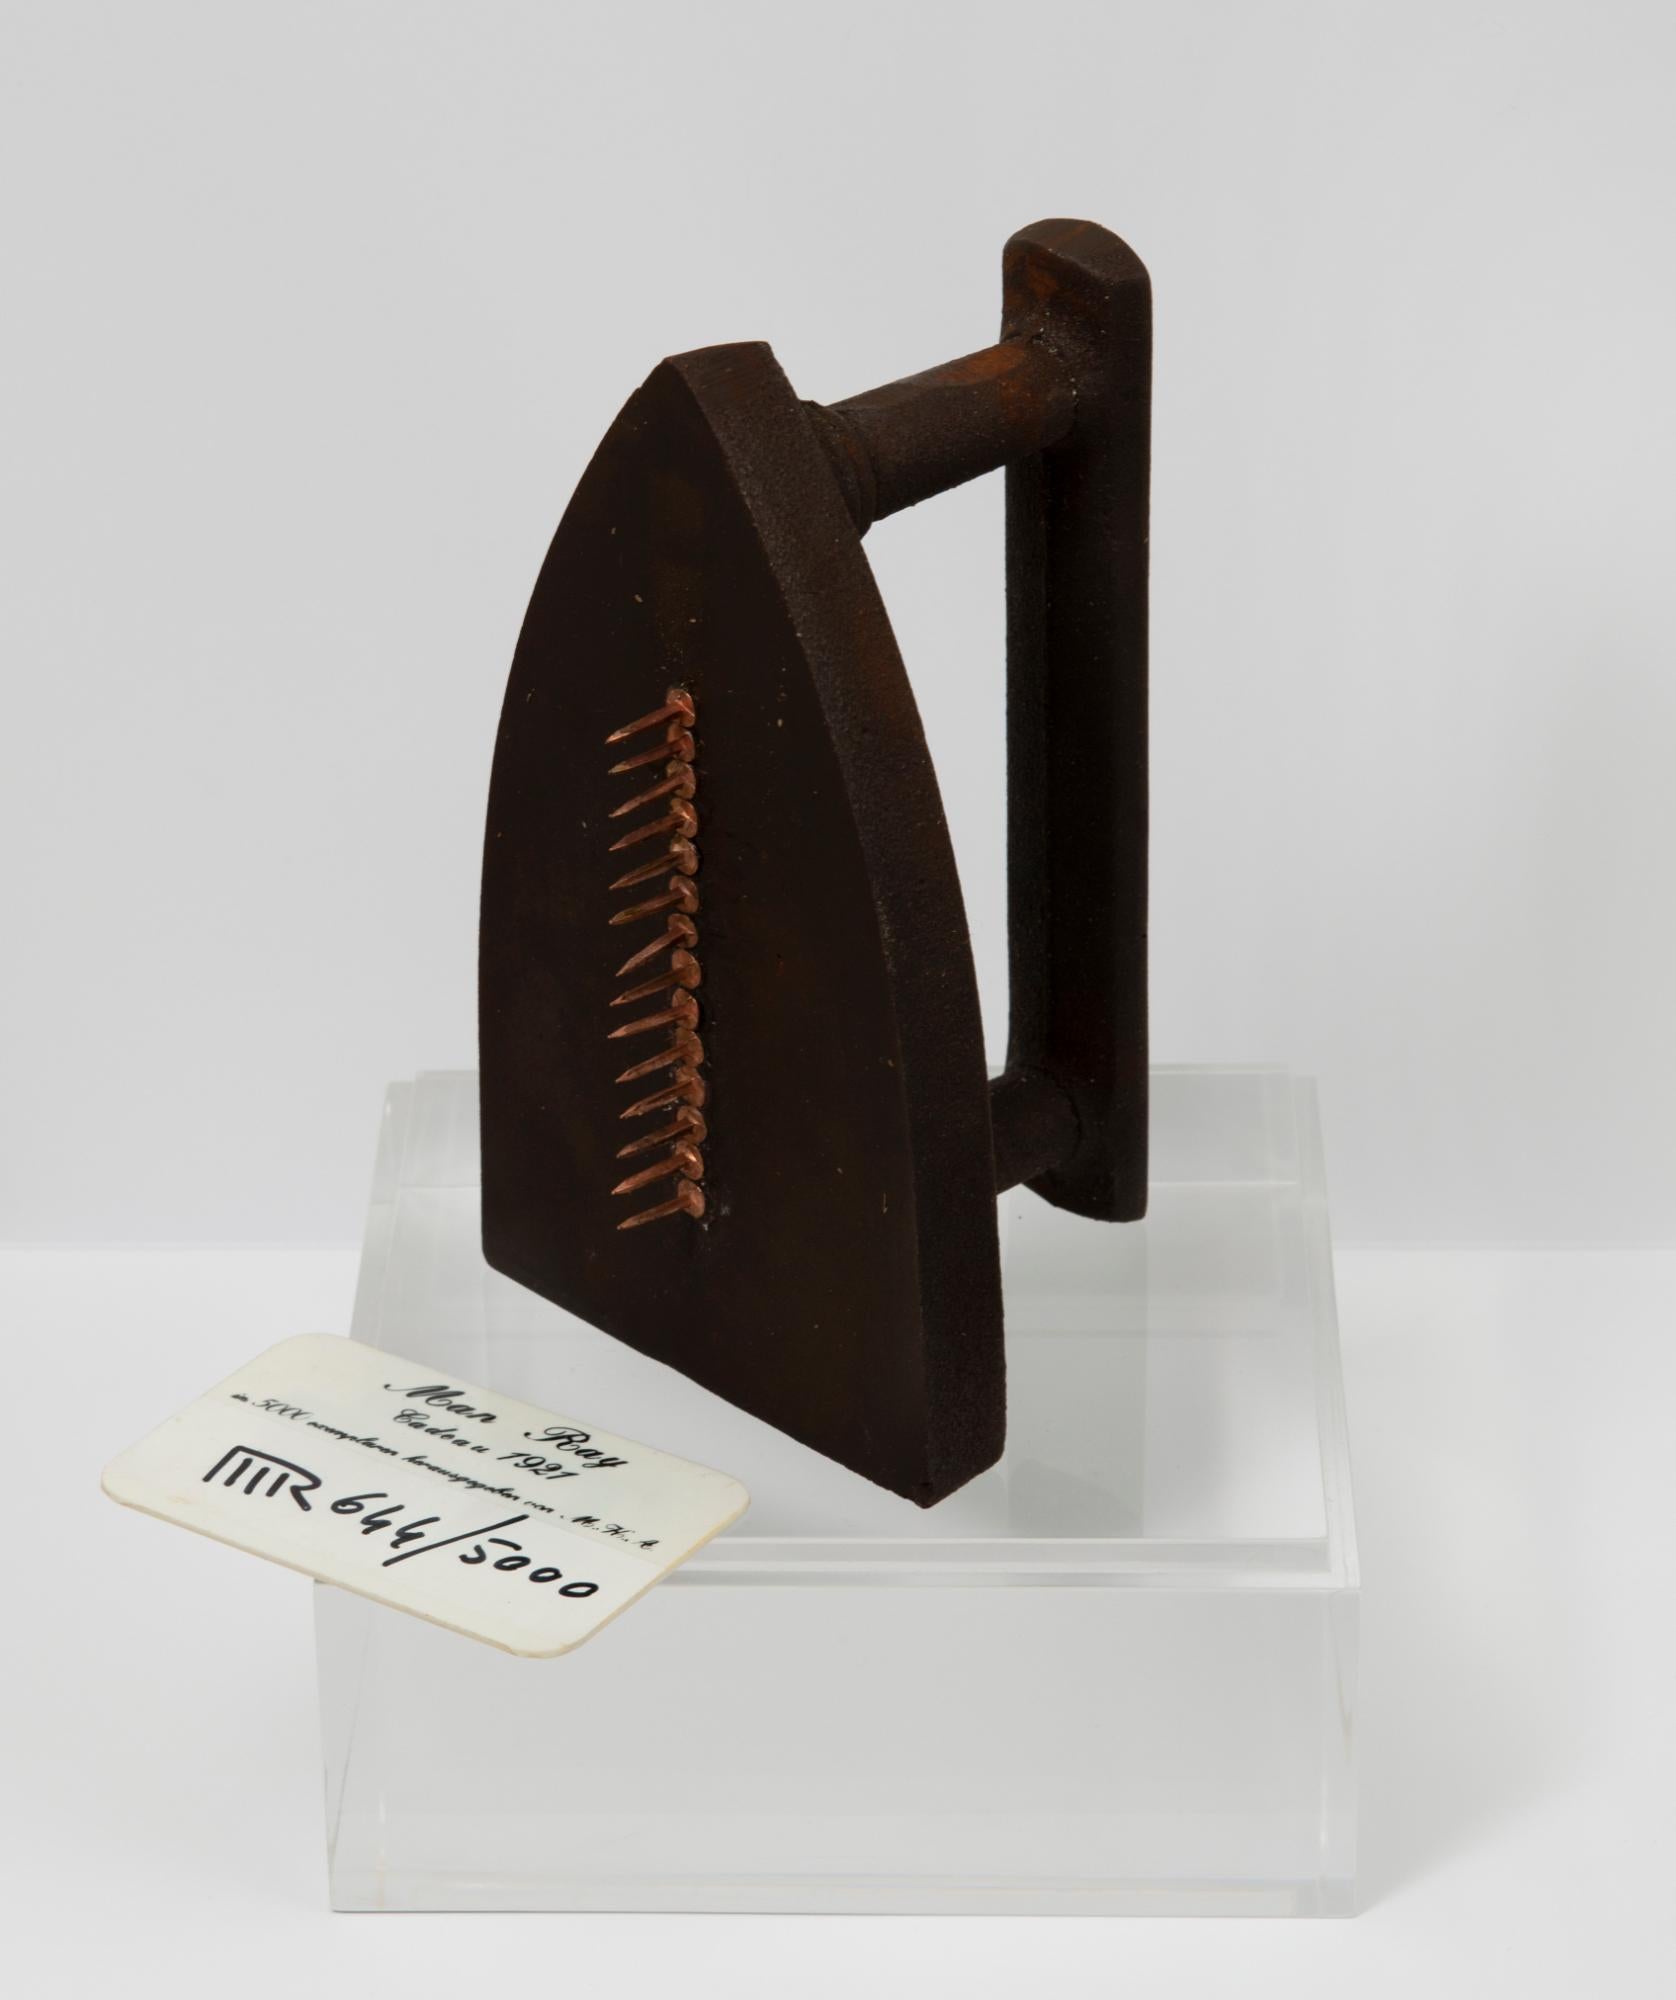 Cadeau (Gift) - Sculpture by Man Ray